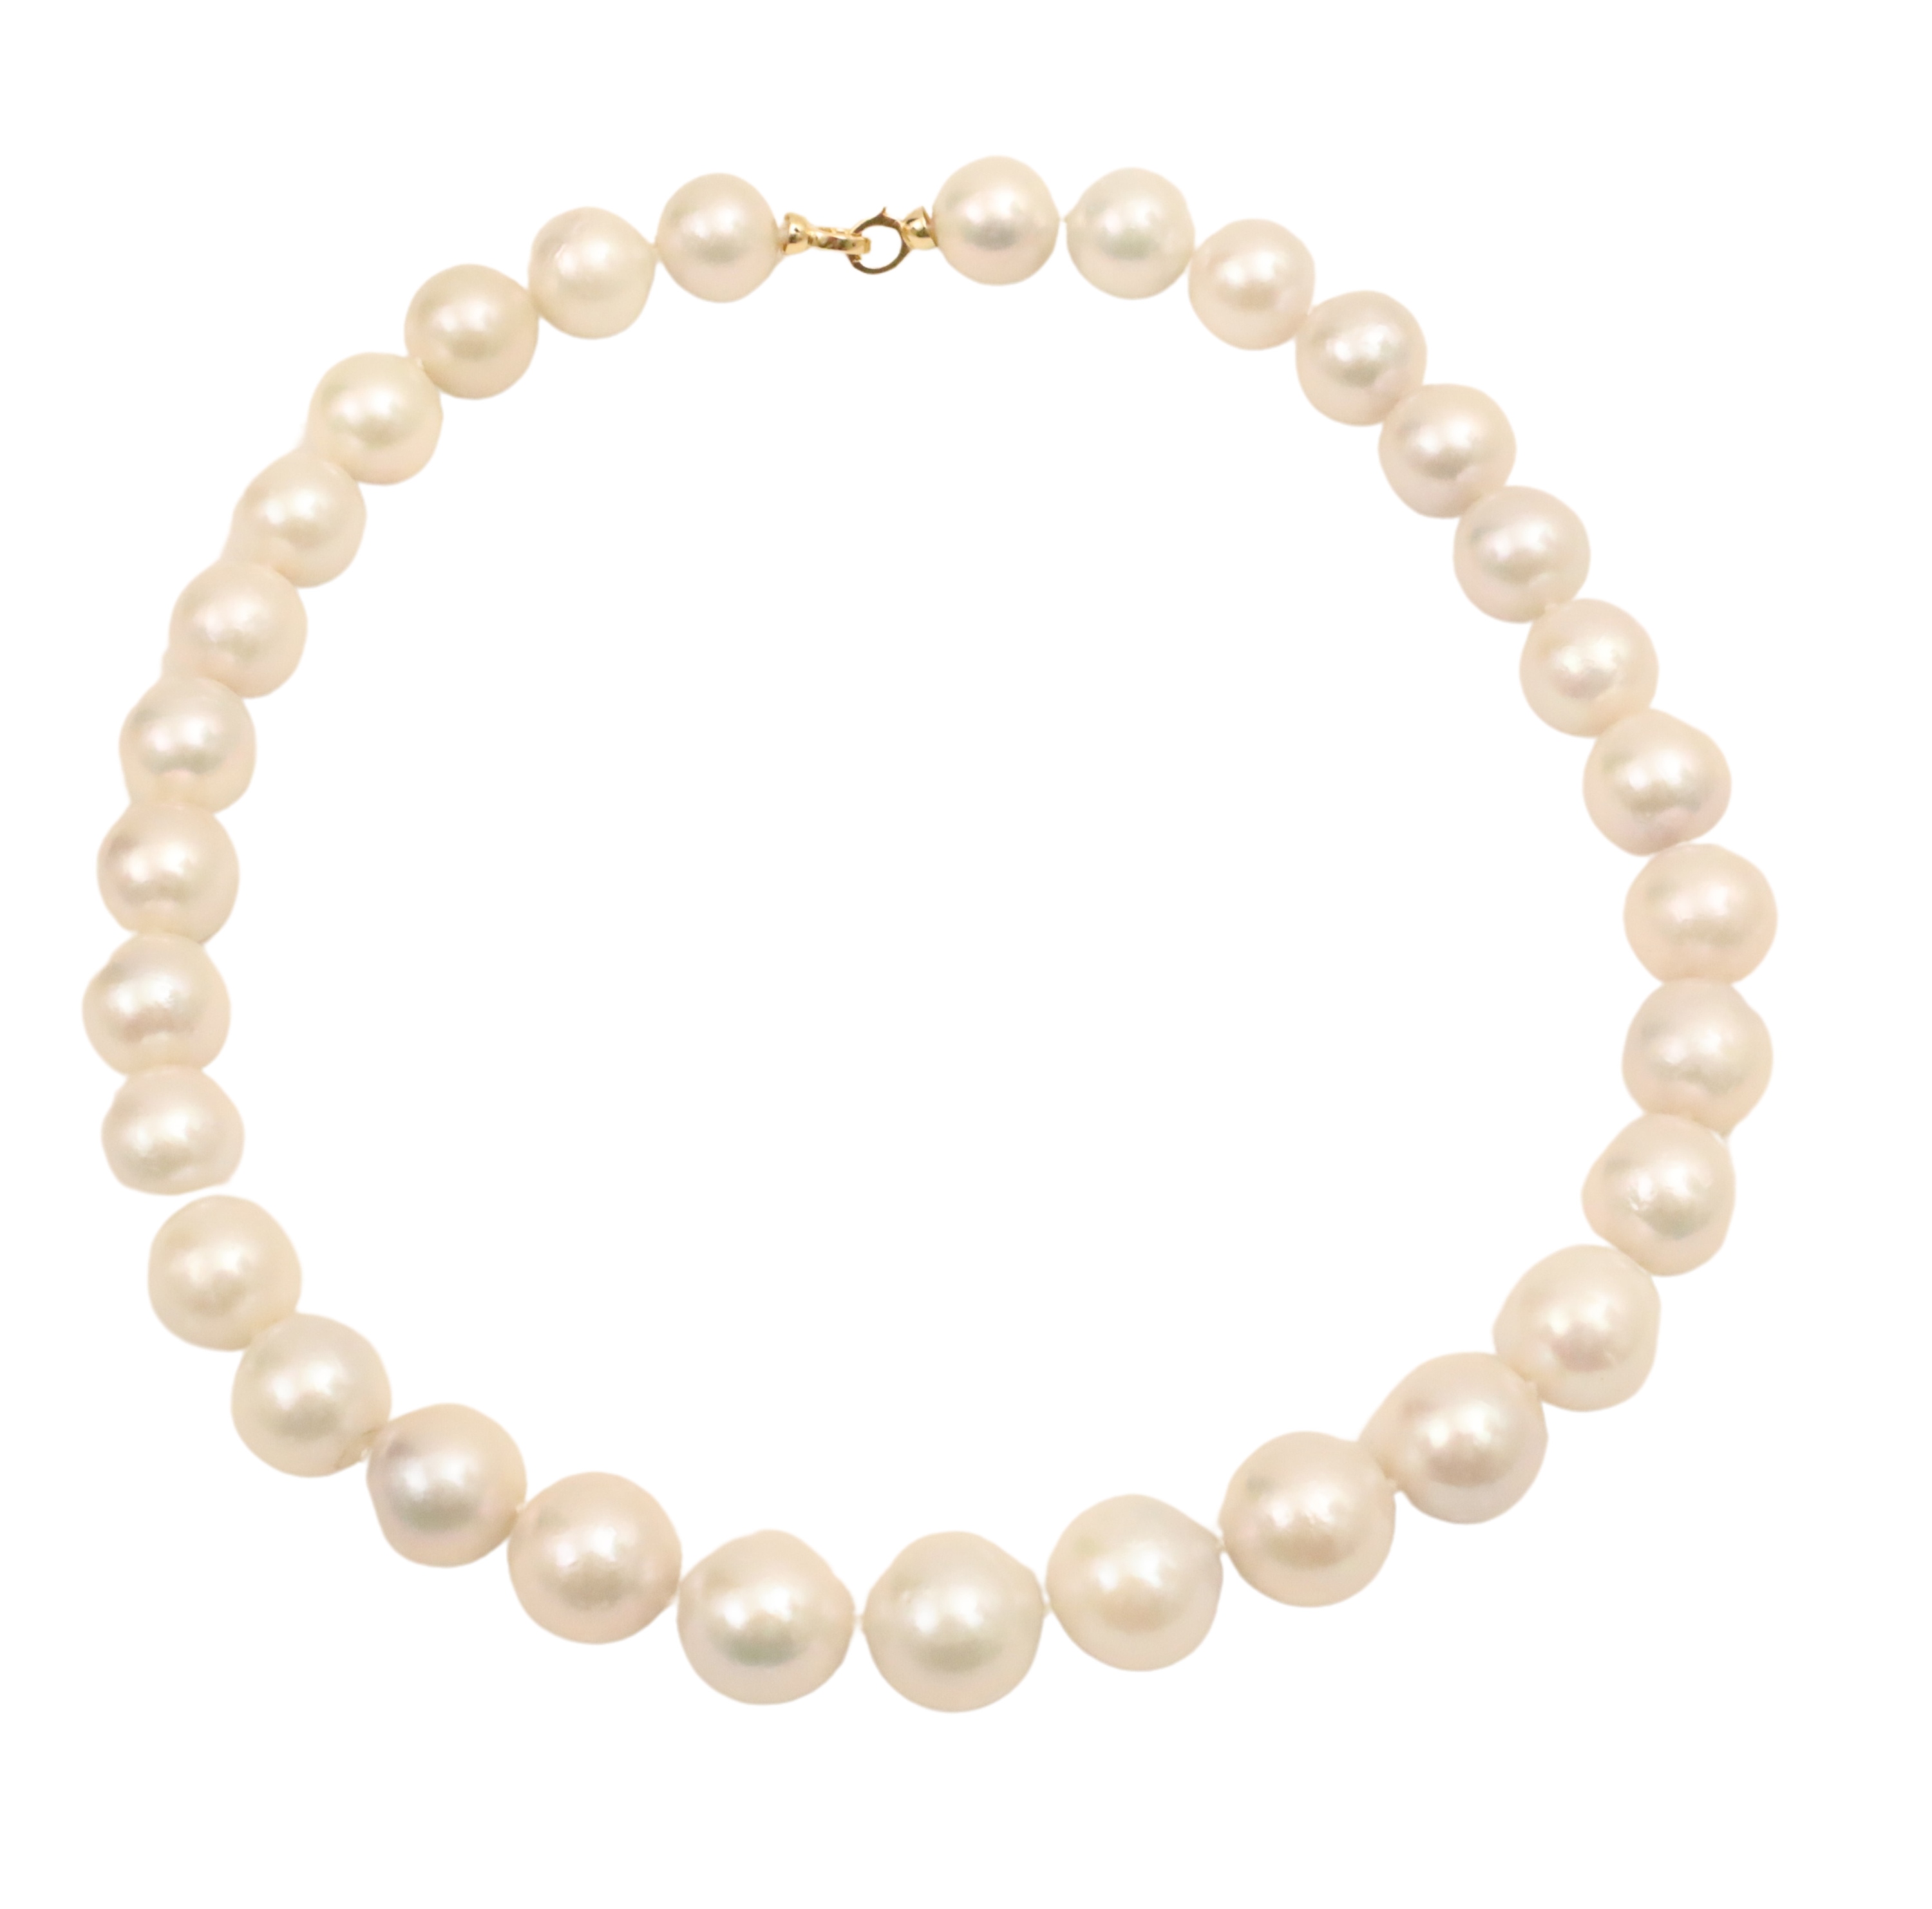 17" STRAND OF PEARLS NECKLACE 17"